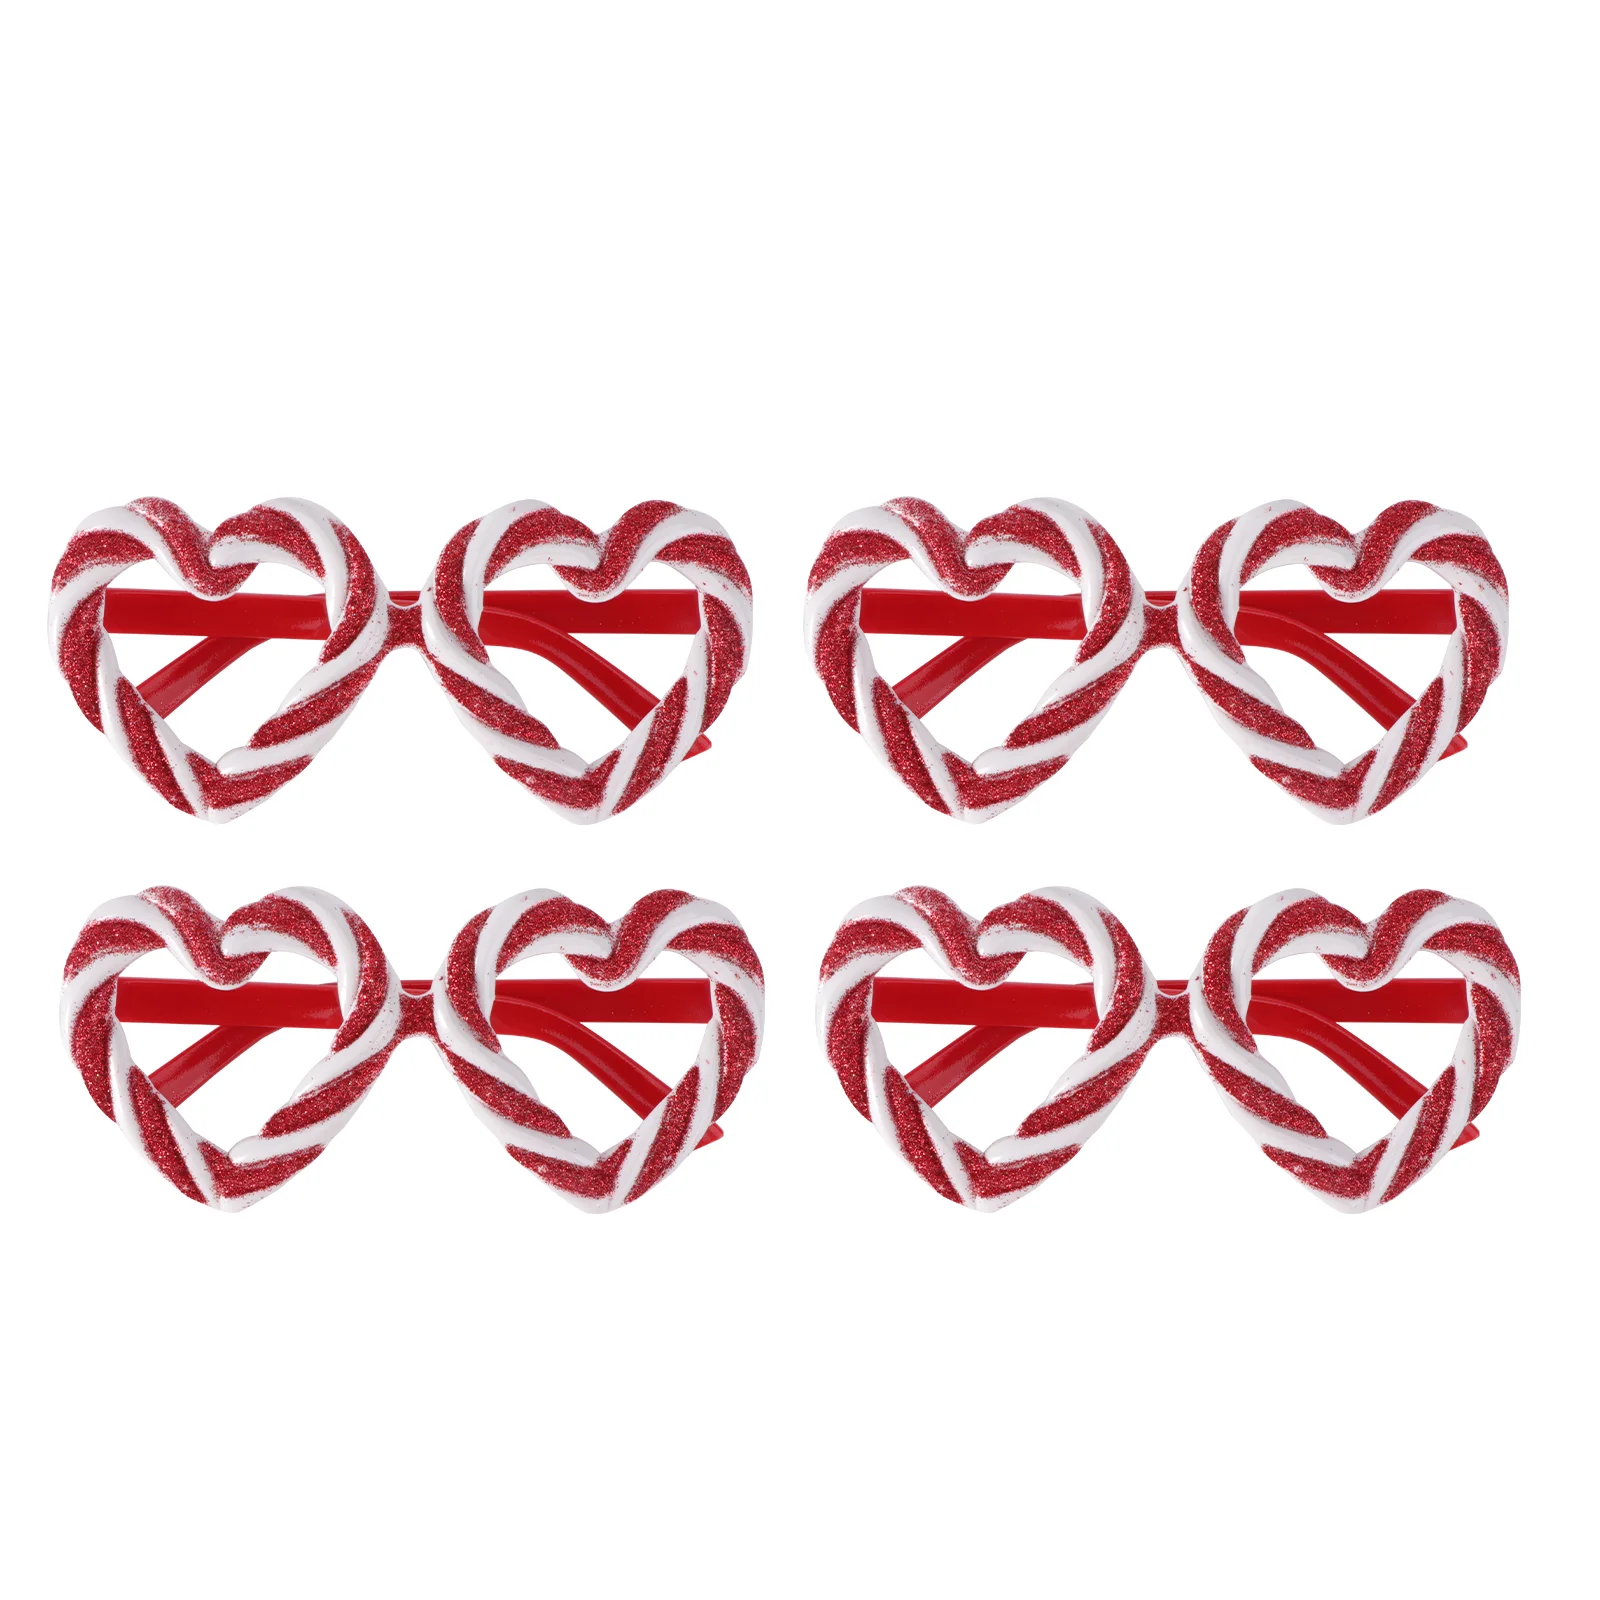 

4 Pairs Heart Shaped Glasses Valentine Creative Love M Party Fashion Eyewear Abs Stylish Eyeglasses Supplies Photo Prop Miss